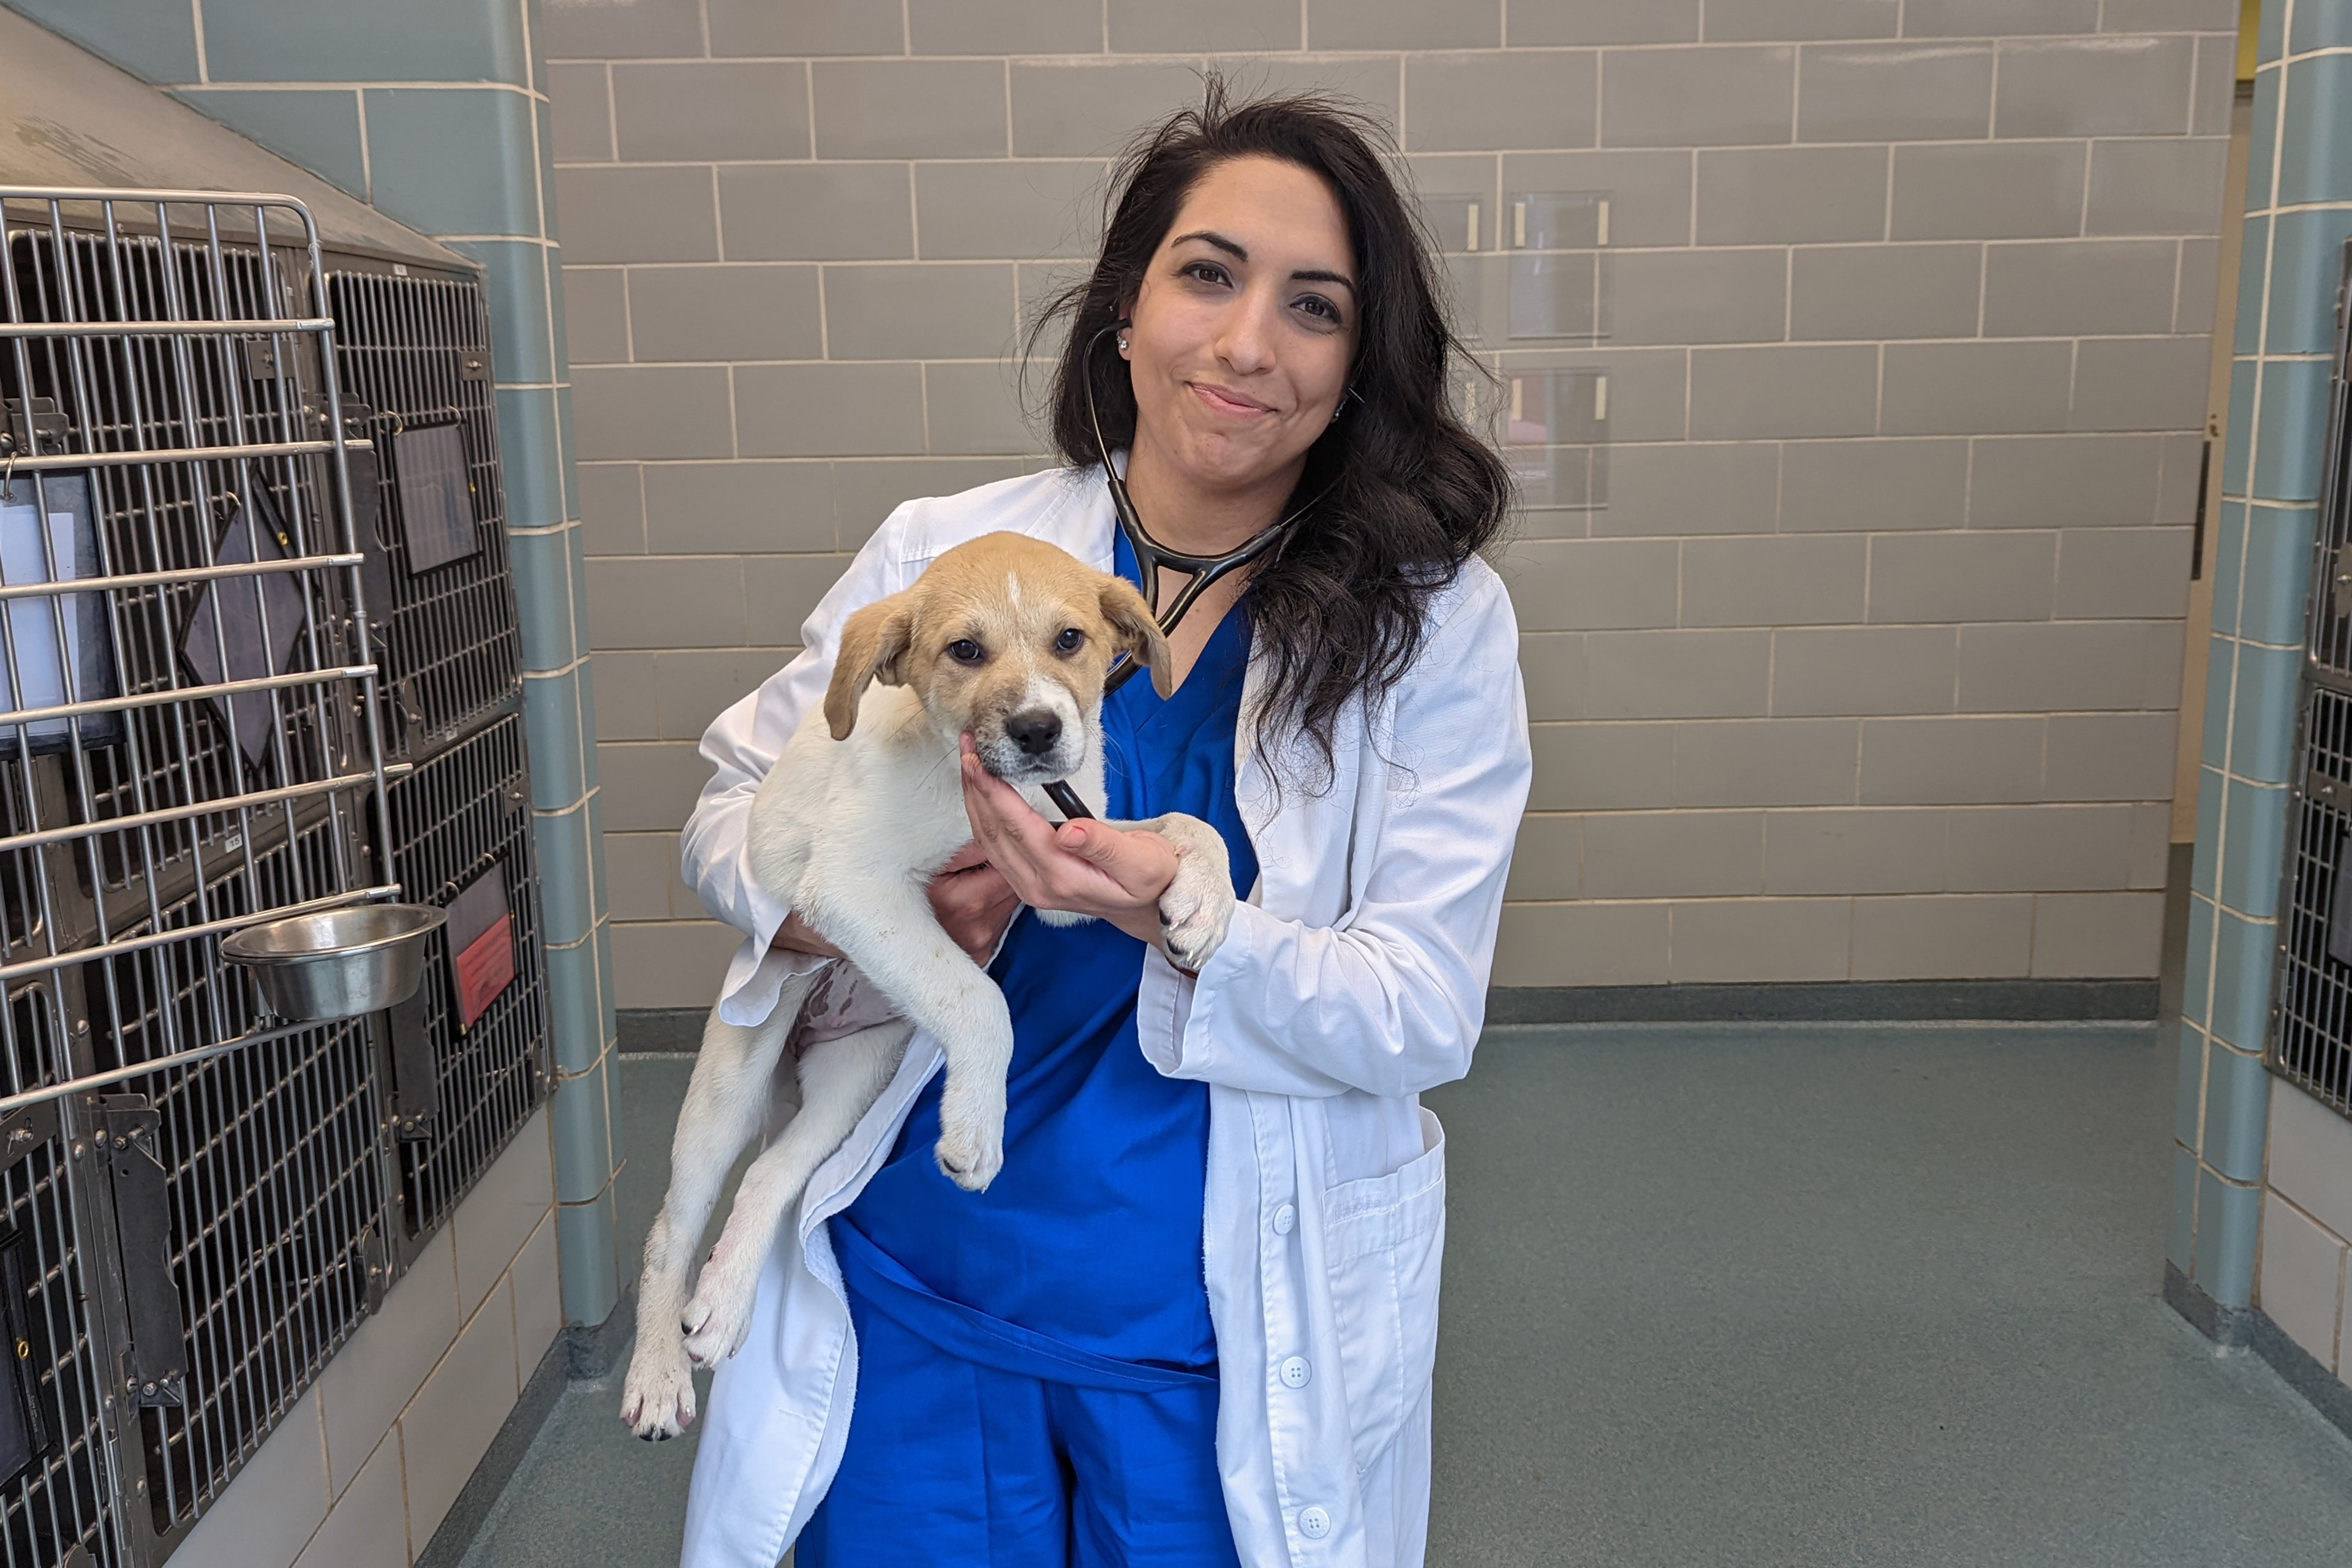 Dr. Razyeeh Mazaheri is seen holding a dog in her arms, smiling at the camera. She's wearing a lab coat and blue scrubs underneath.